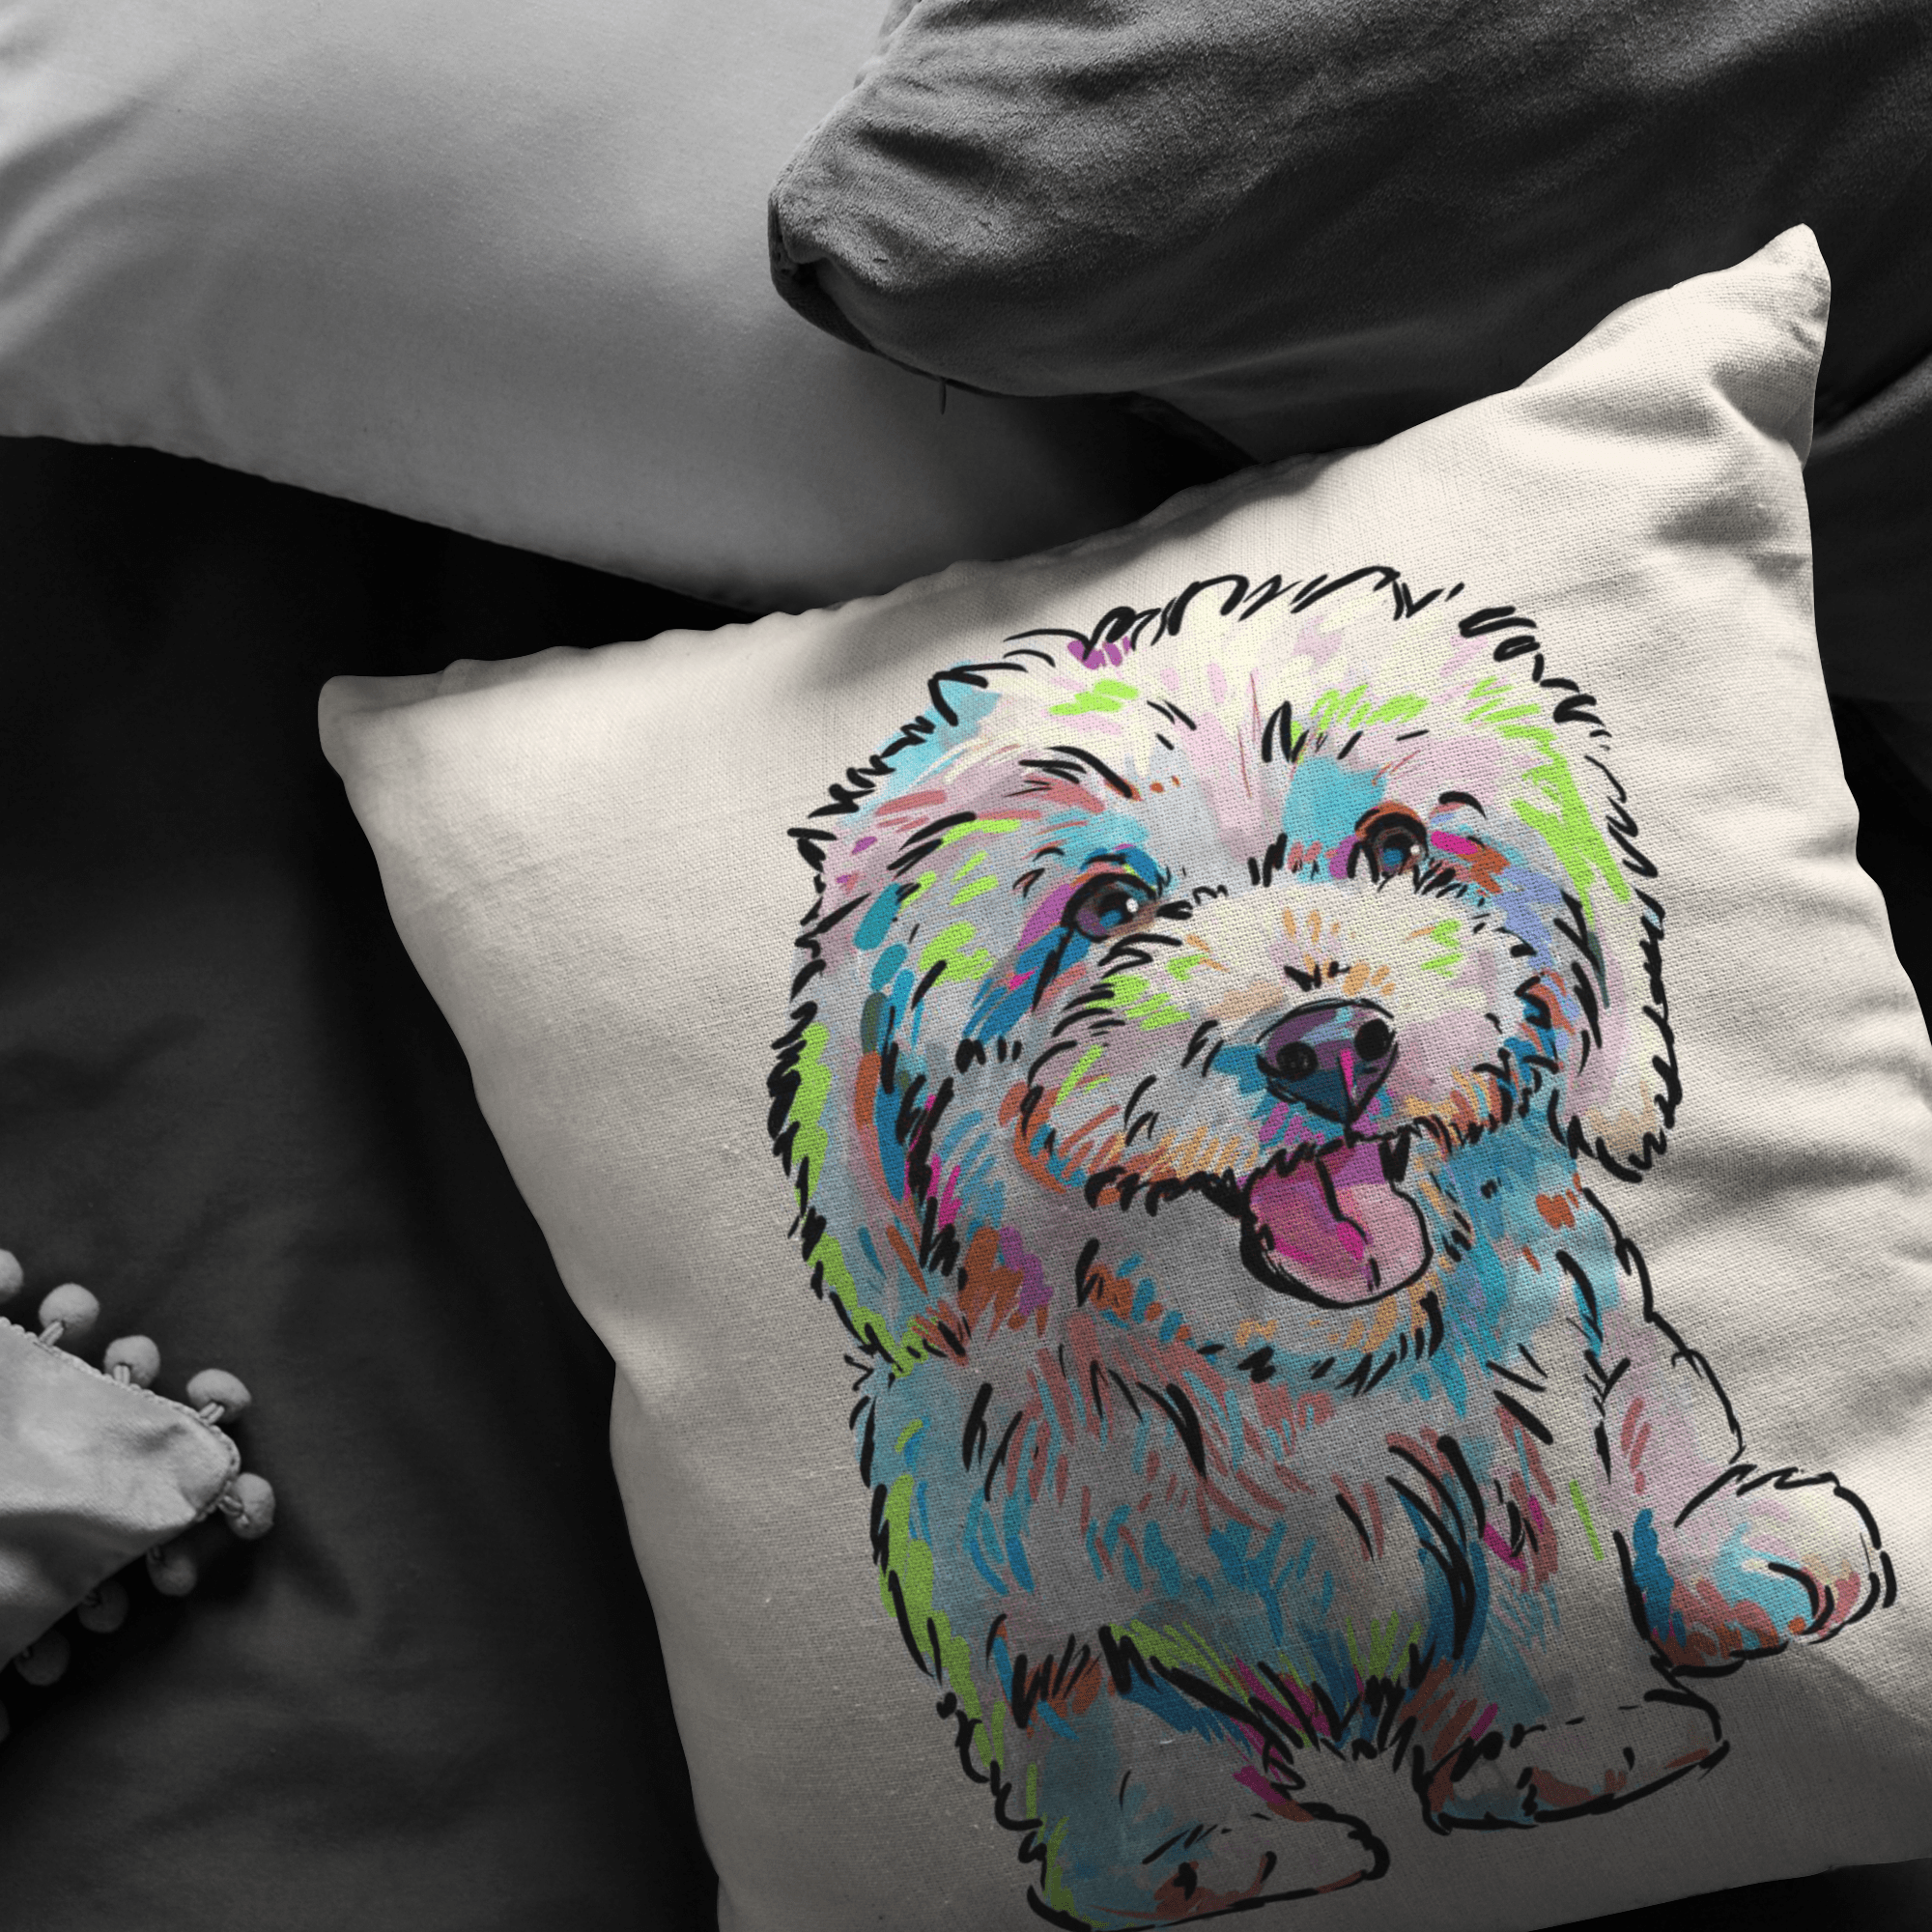 Bichon Frise Pillow Cover Only One Sided Print, No Insert Included, No Home is Complete Without a Bichon Frise,